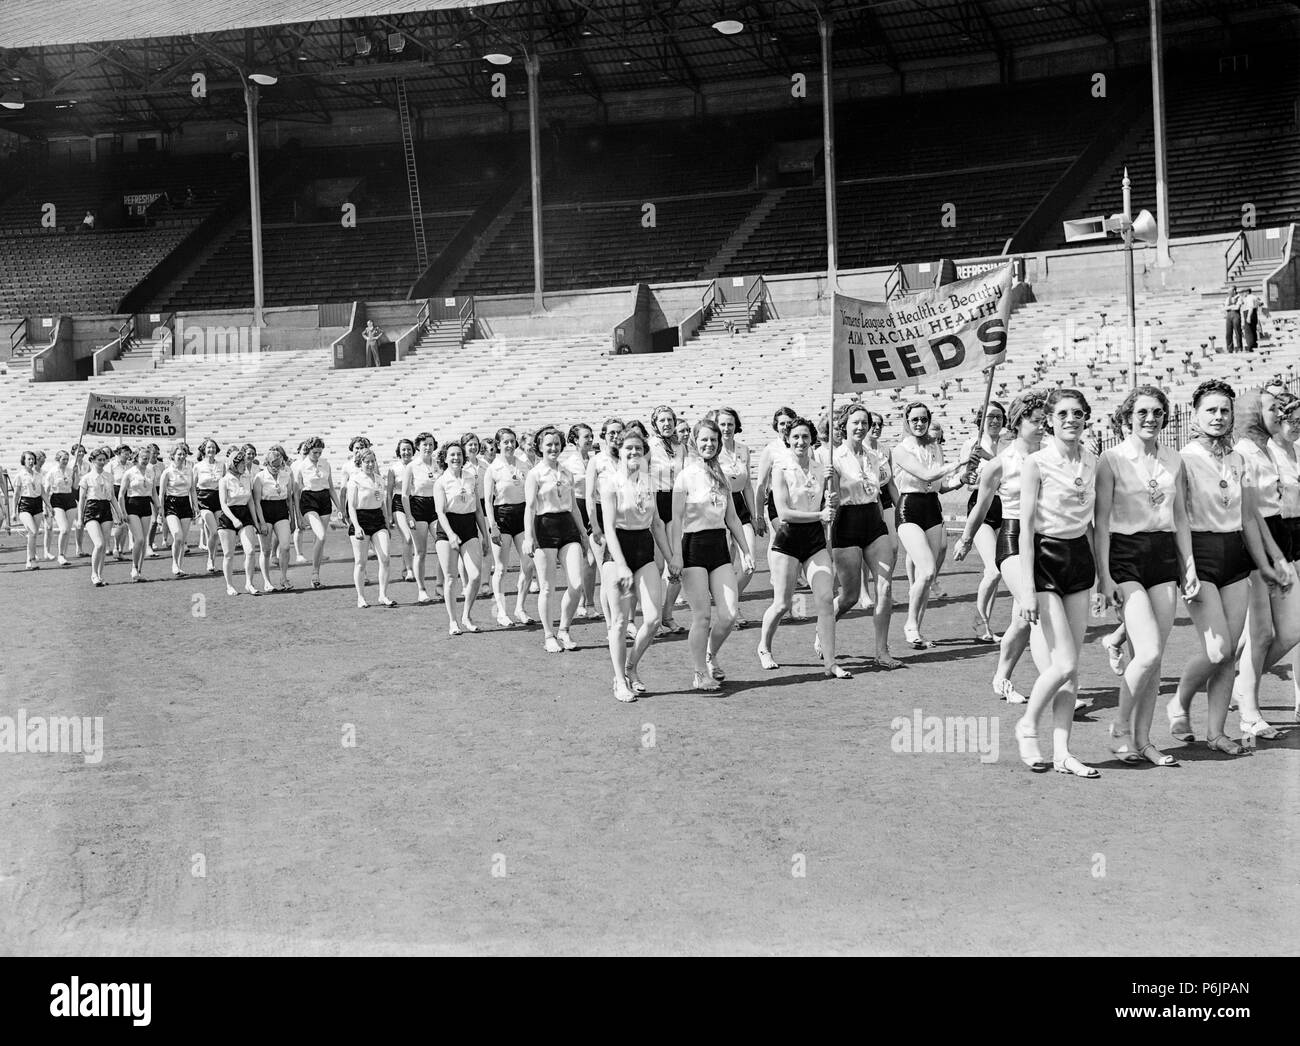 Members of The Women's League of Health and Beauty, marching inside a large sports stadium in England during the 1930s. Banners from the branches at Leeds, and Harrogate and Huddersfield are visible. They are campaigning about Racial Health. Stock Photo